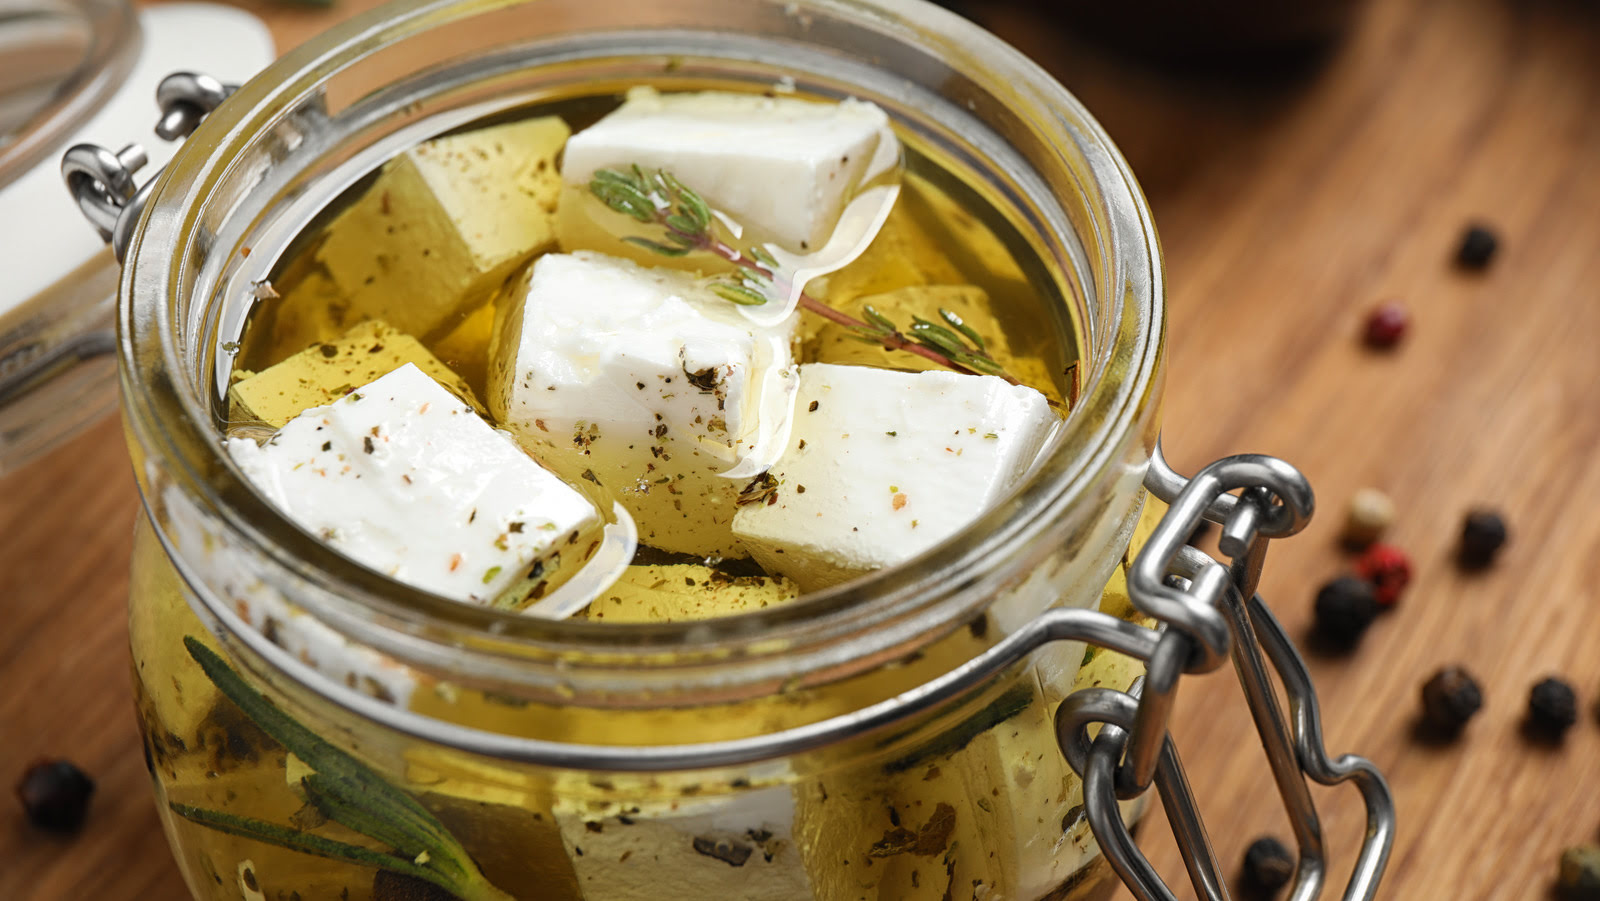 How To Store Feta Cheese Once Opened